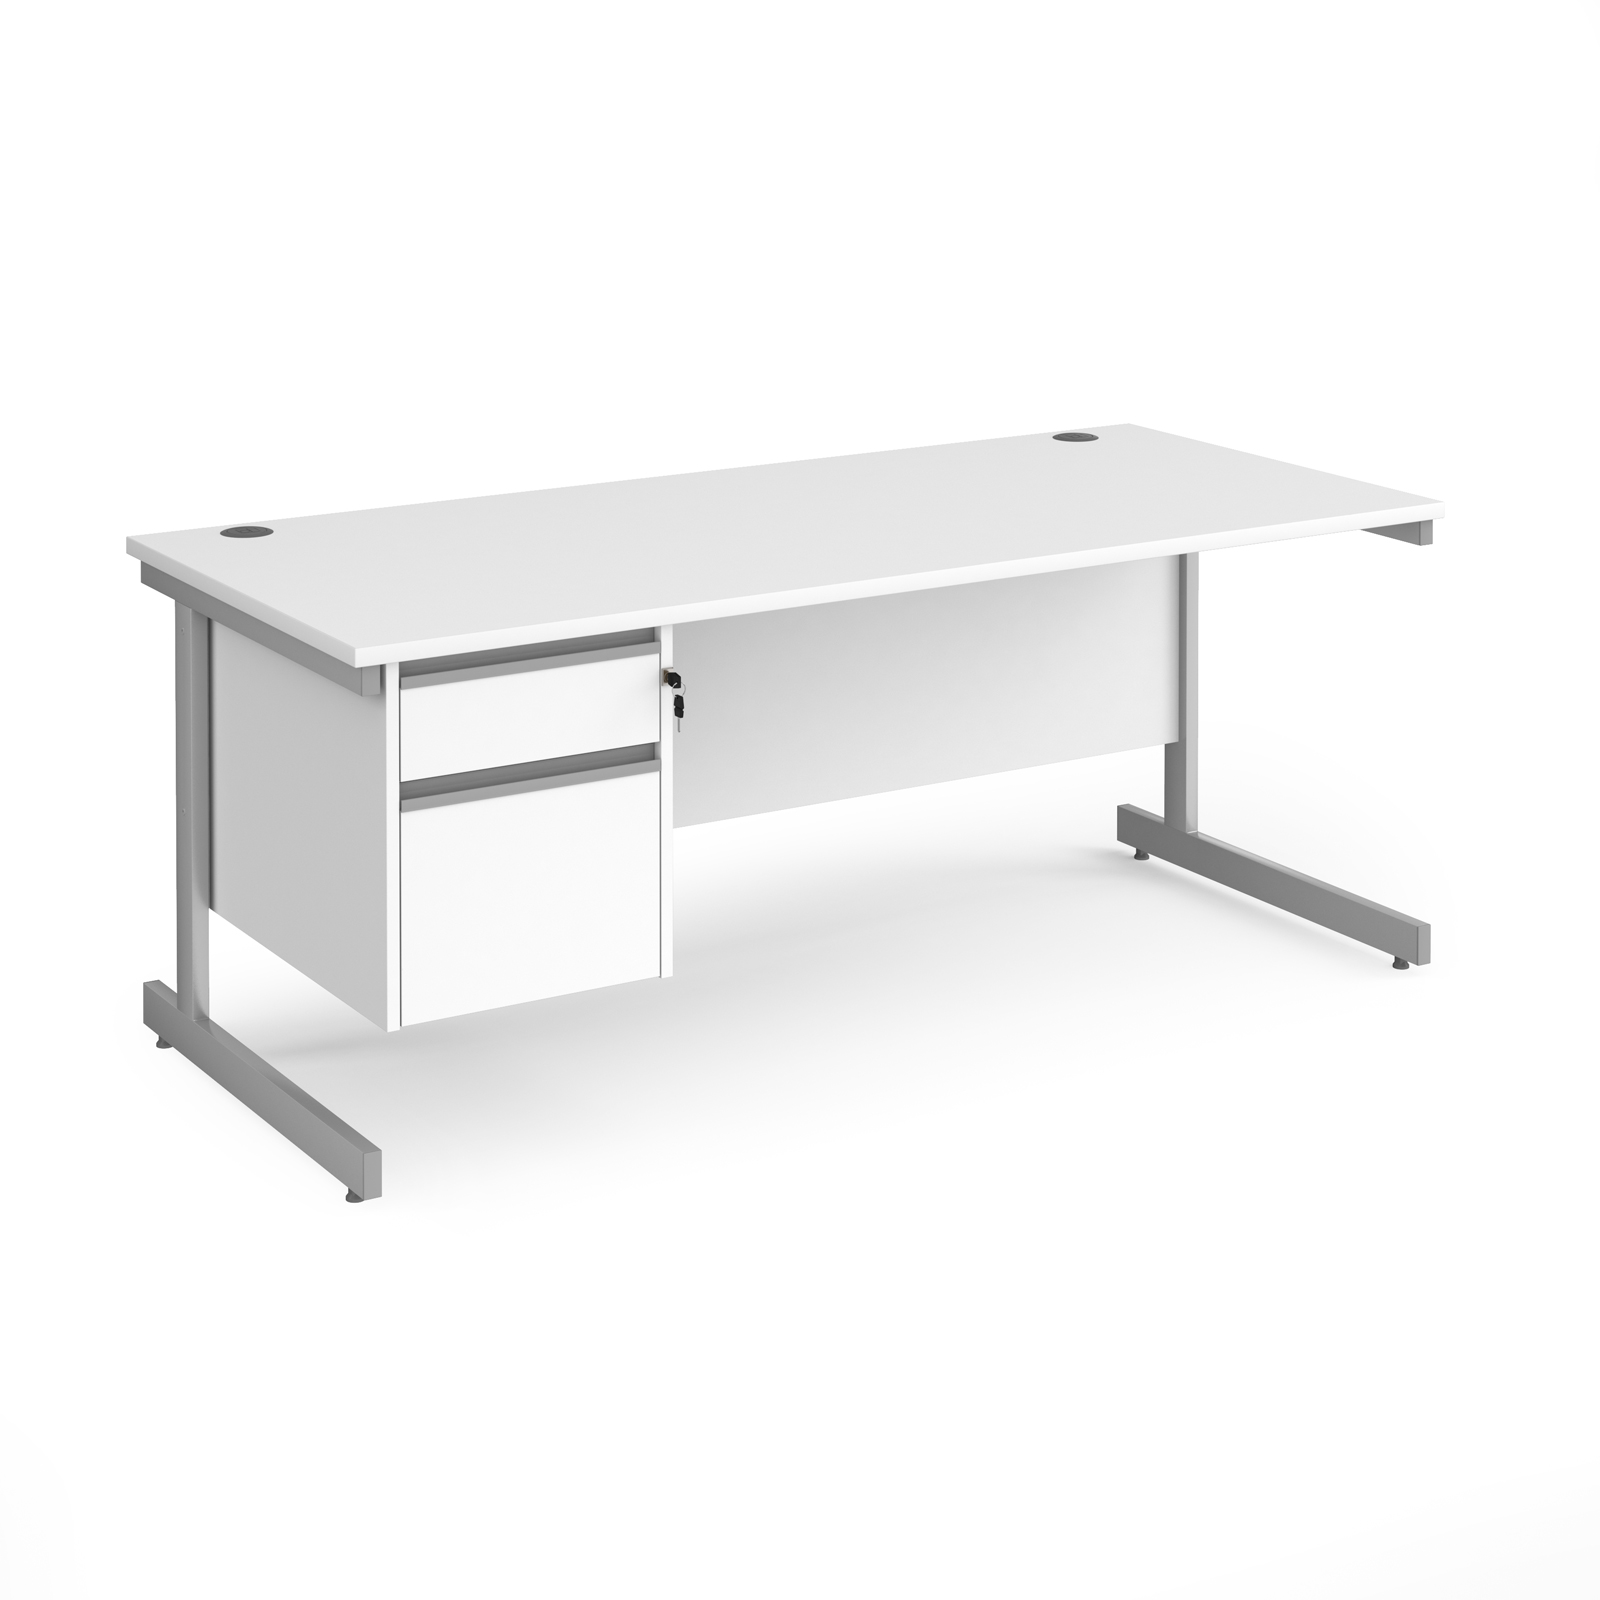 Contract 25 cantilever leg straight desk with 2 drawer pedestal